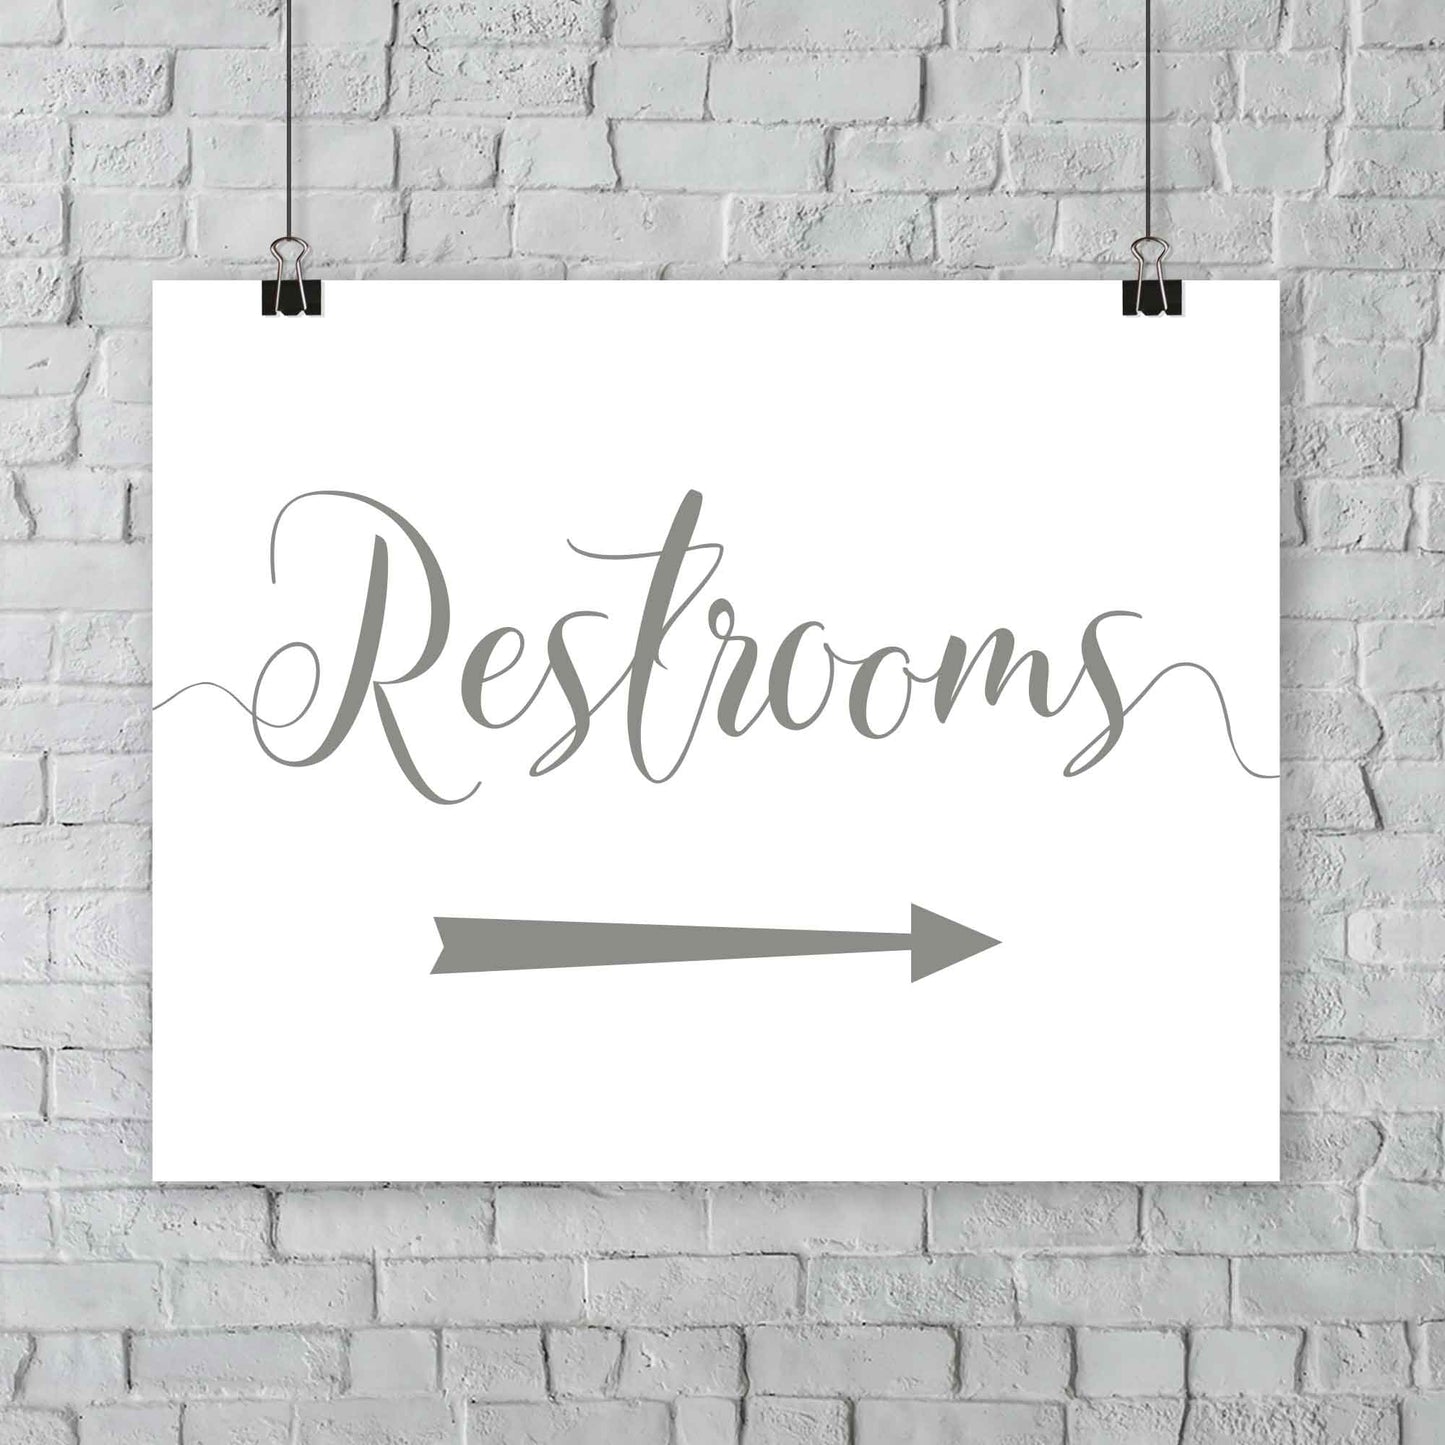 laurel green wedding restrooms arrow signage hanging from a wall